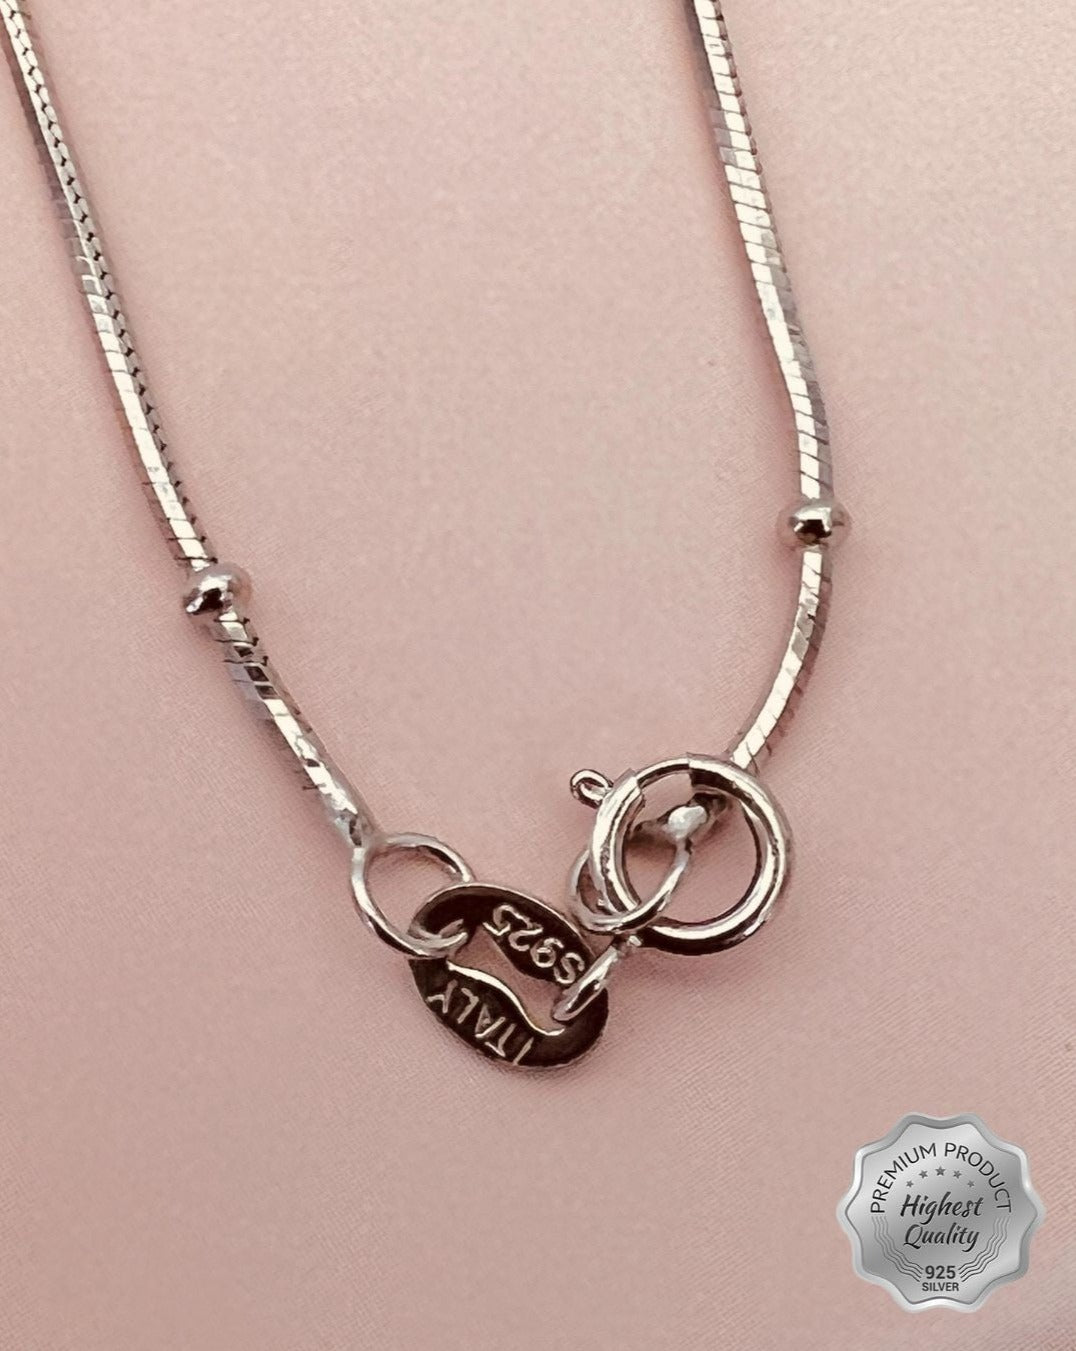 Buy Silver Chain Online At Best Prices In India